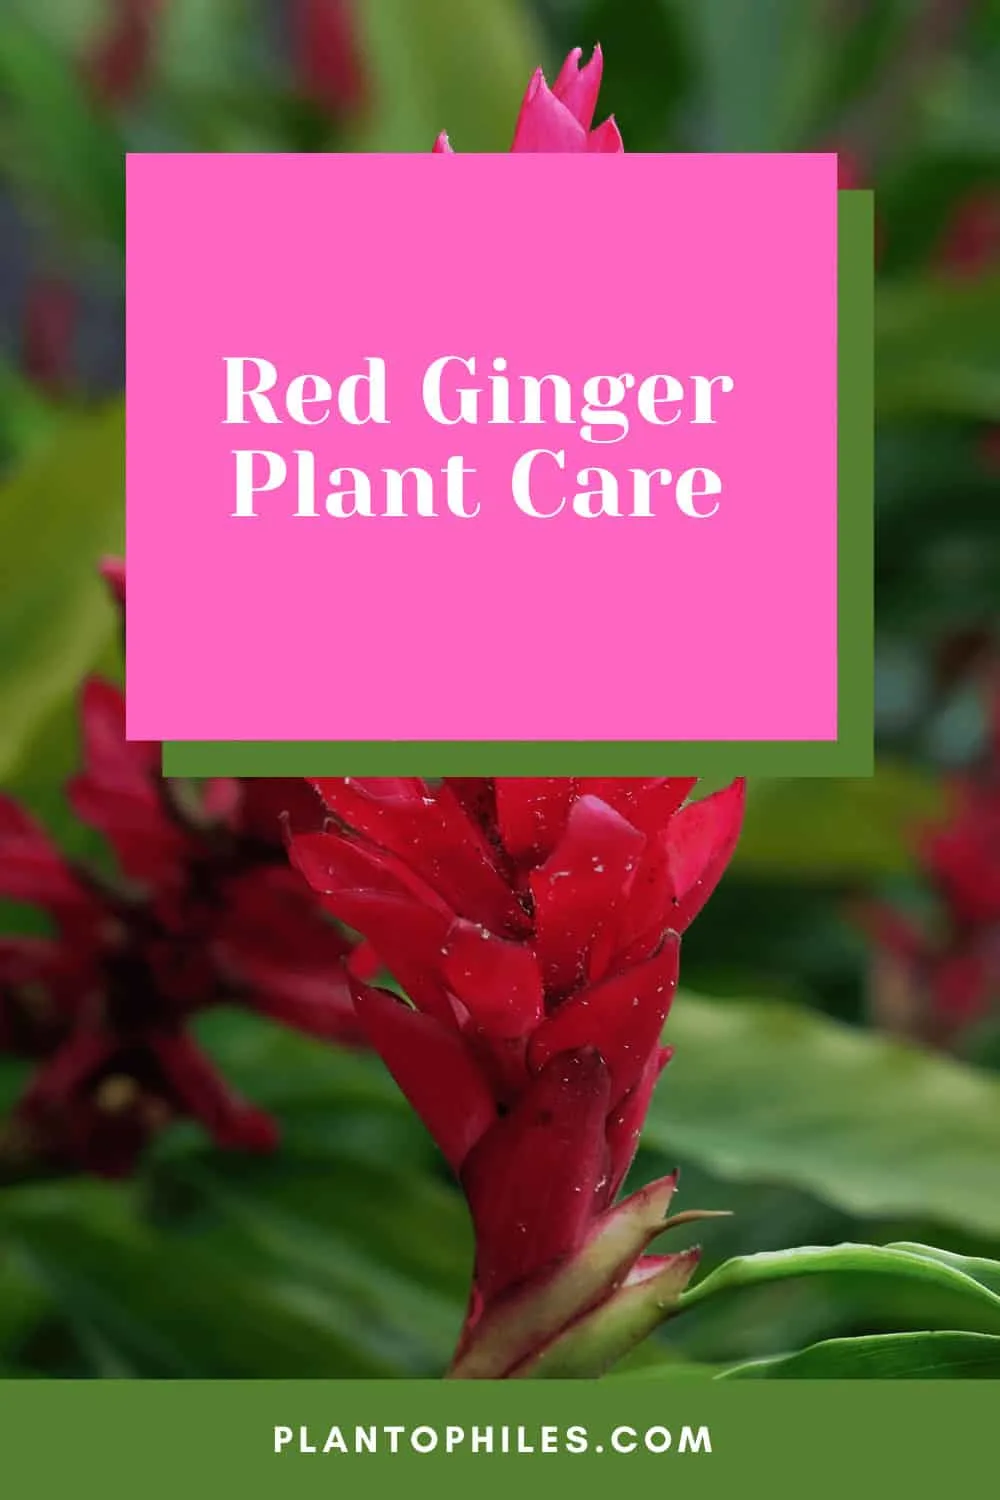 Red Ginger Plant Care